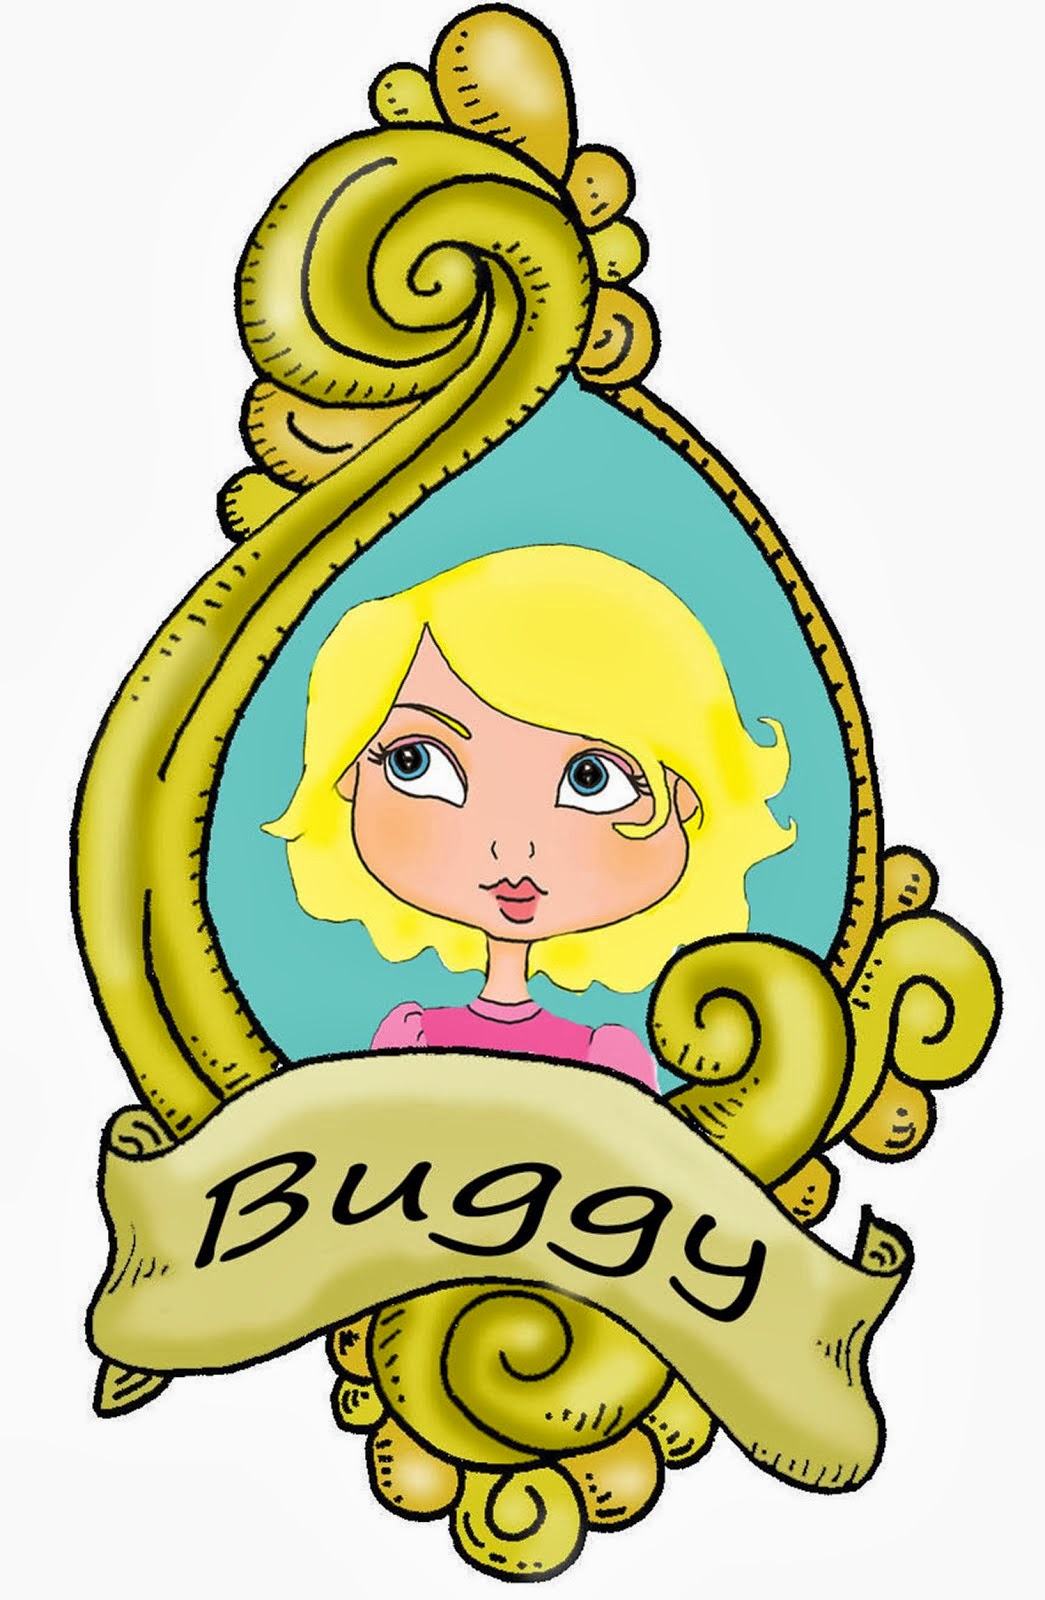 About Buggy